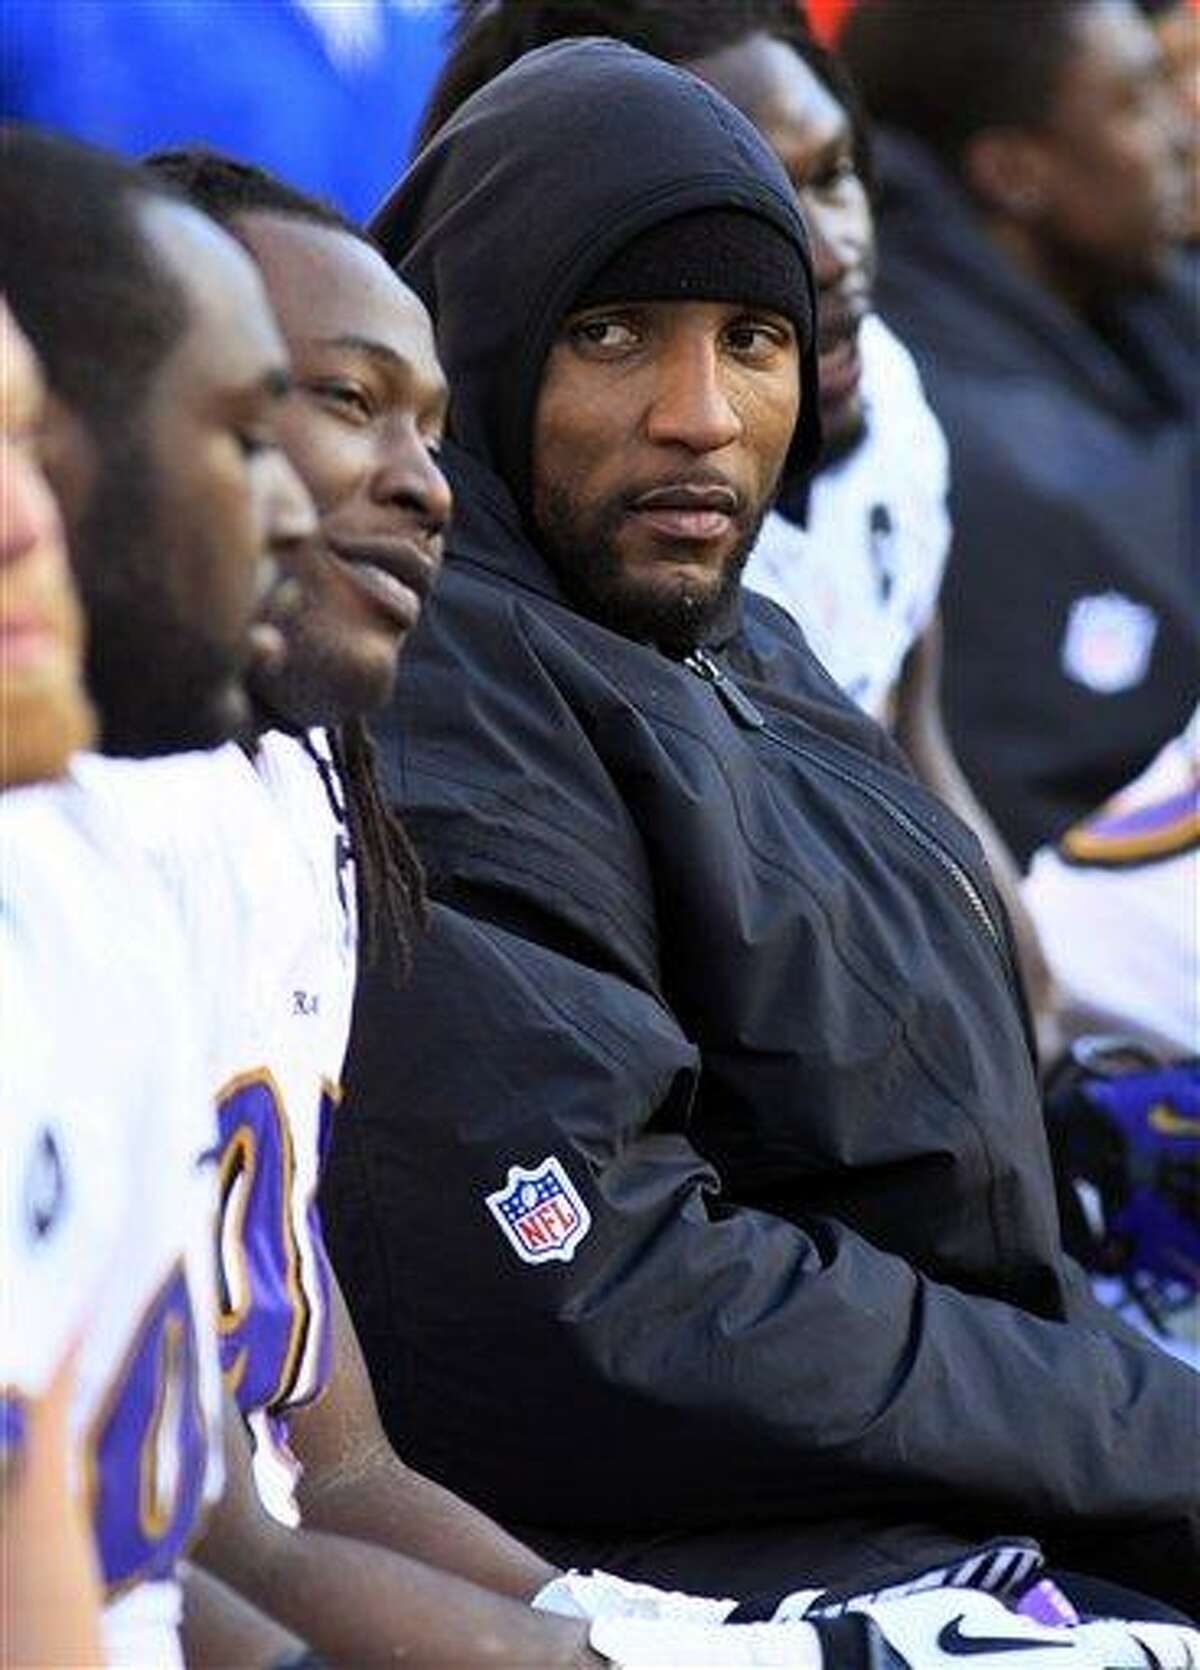 Preston: Ray Lewis will retire as the greatest middle linebacker